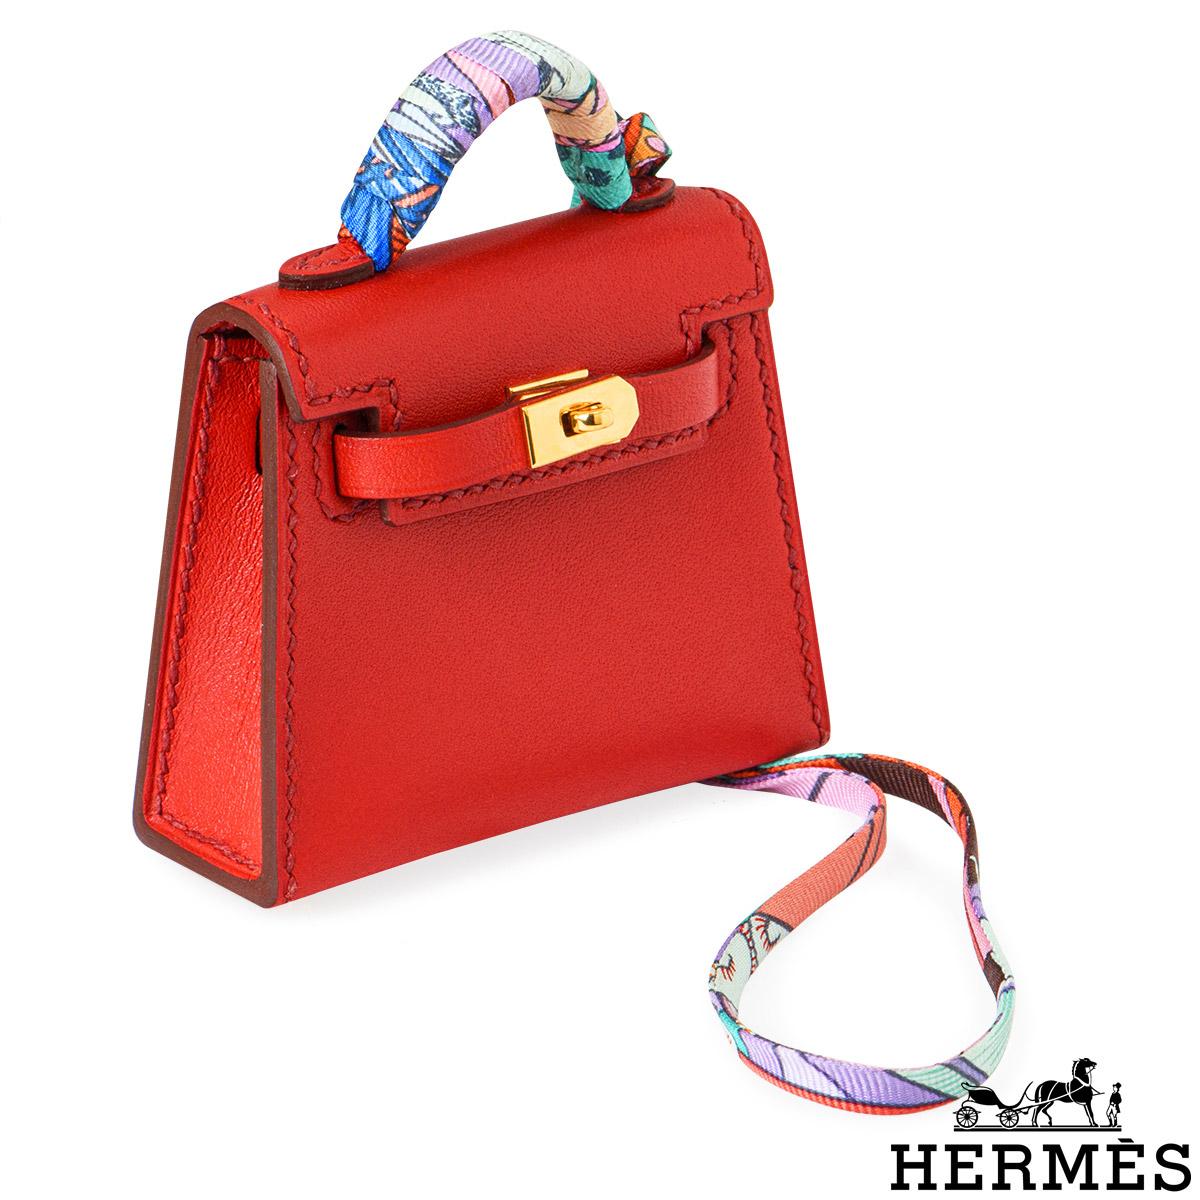 A charming accessory - an adorable Hermès Mini Kelly Twilly bag charm. The exterior of this Kelly bag charm features a Sanguine Tadelakt leather detailed with tonal stitching. It features gold-tone hardware with a front toggle closure, and a top